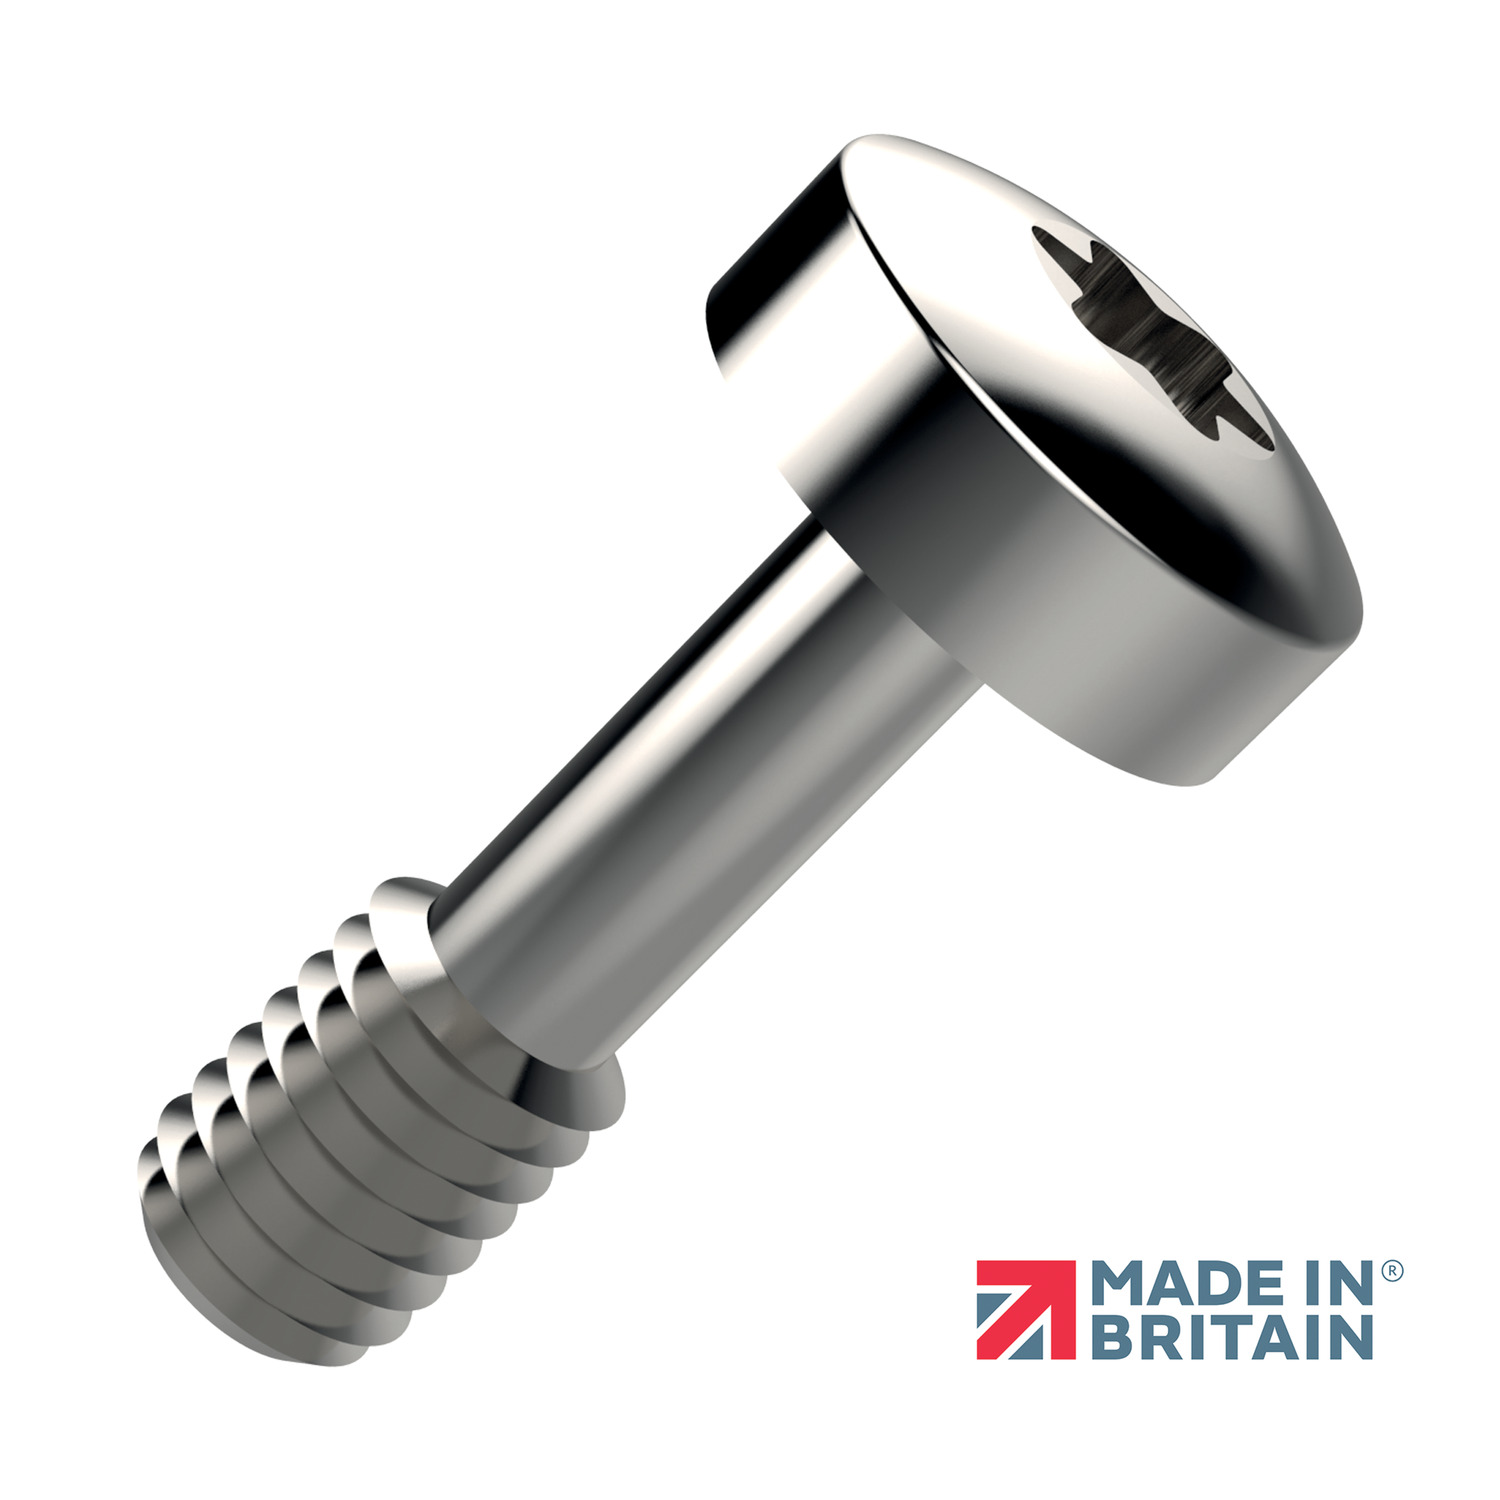 Captive Screws - Pan Head Captive Phillips drive pan head screws available in M2.5 to M6. Made from stainless steel and can also be manufactured in titanium, monel and other materials.